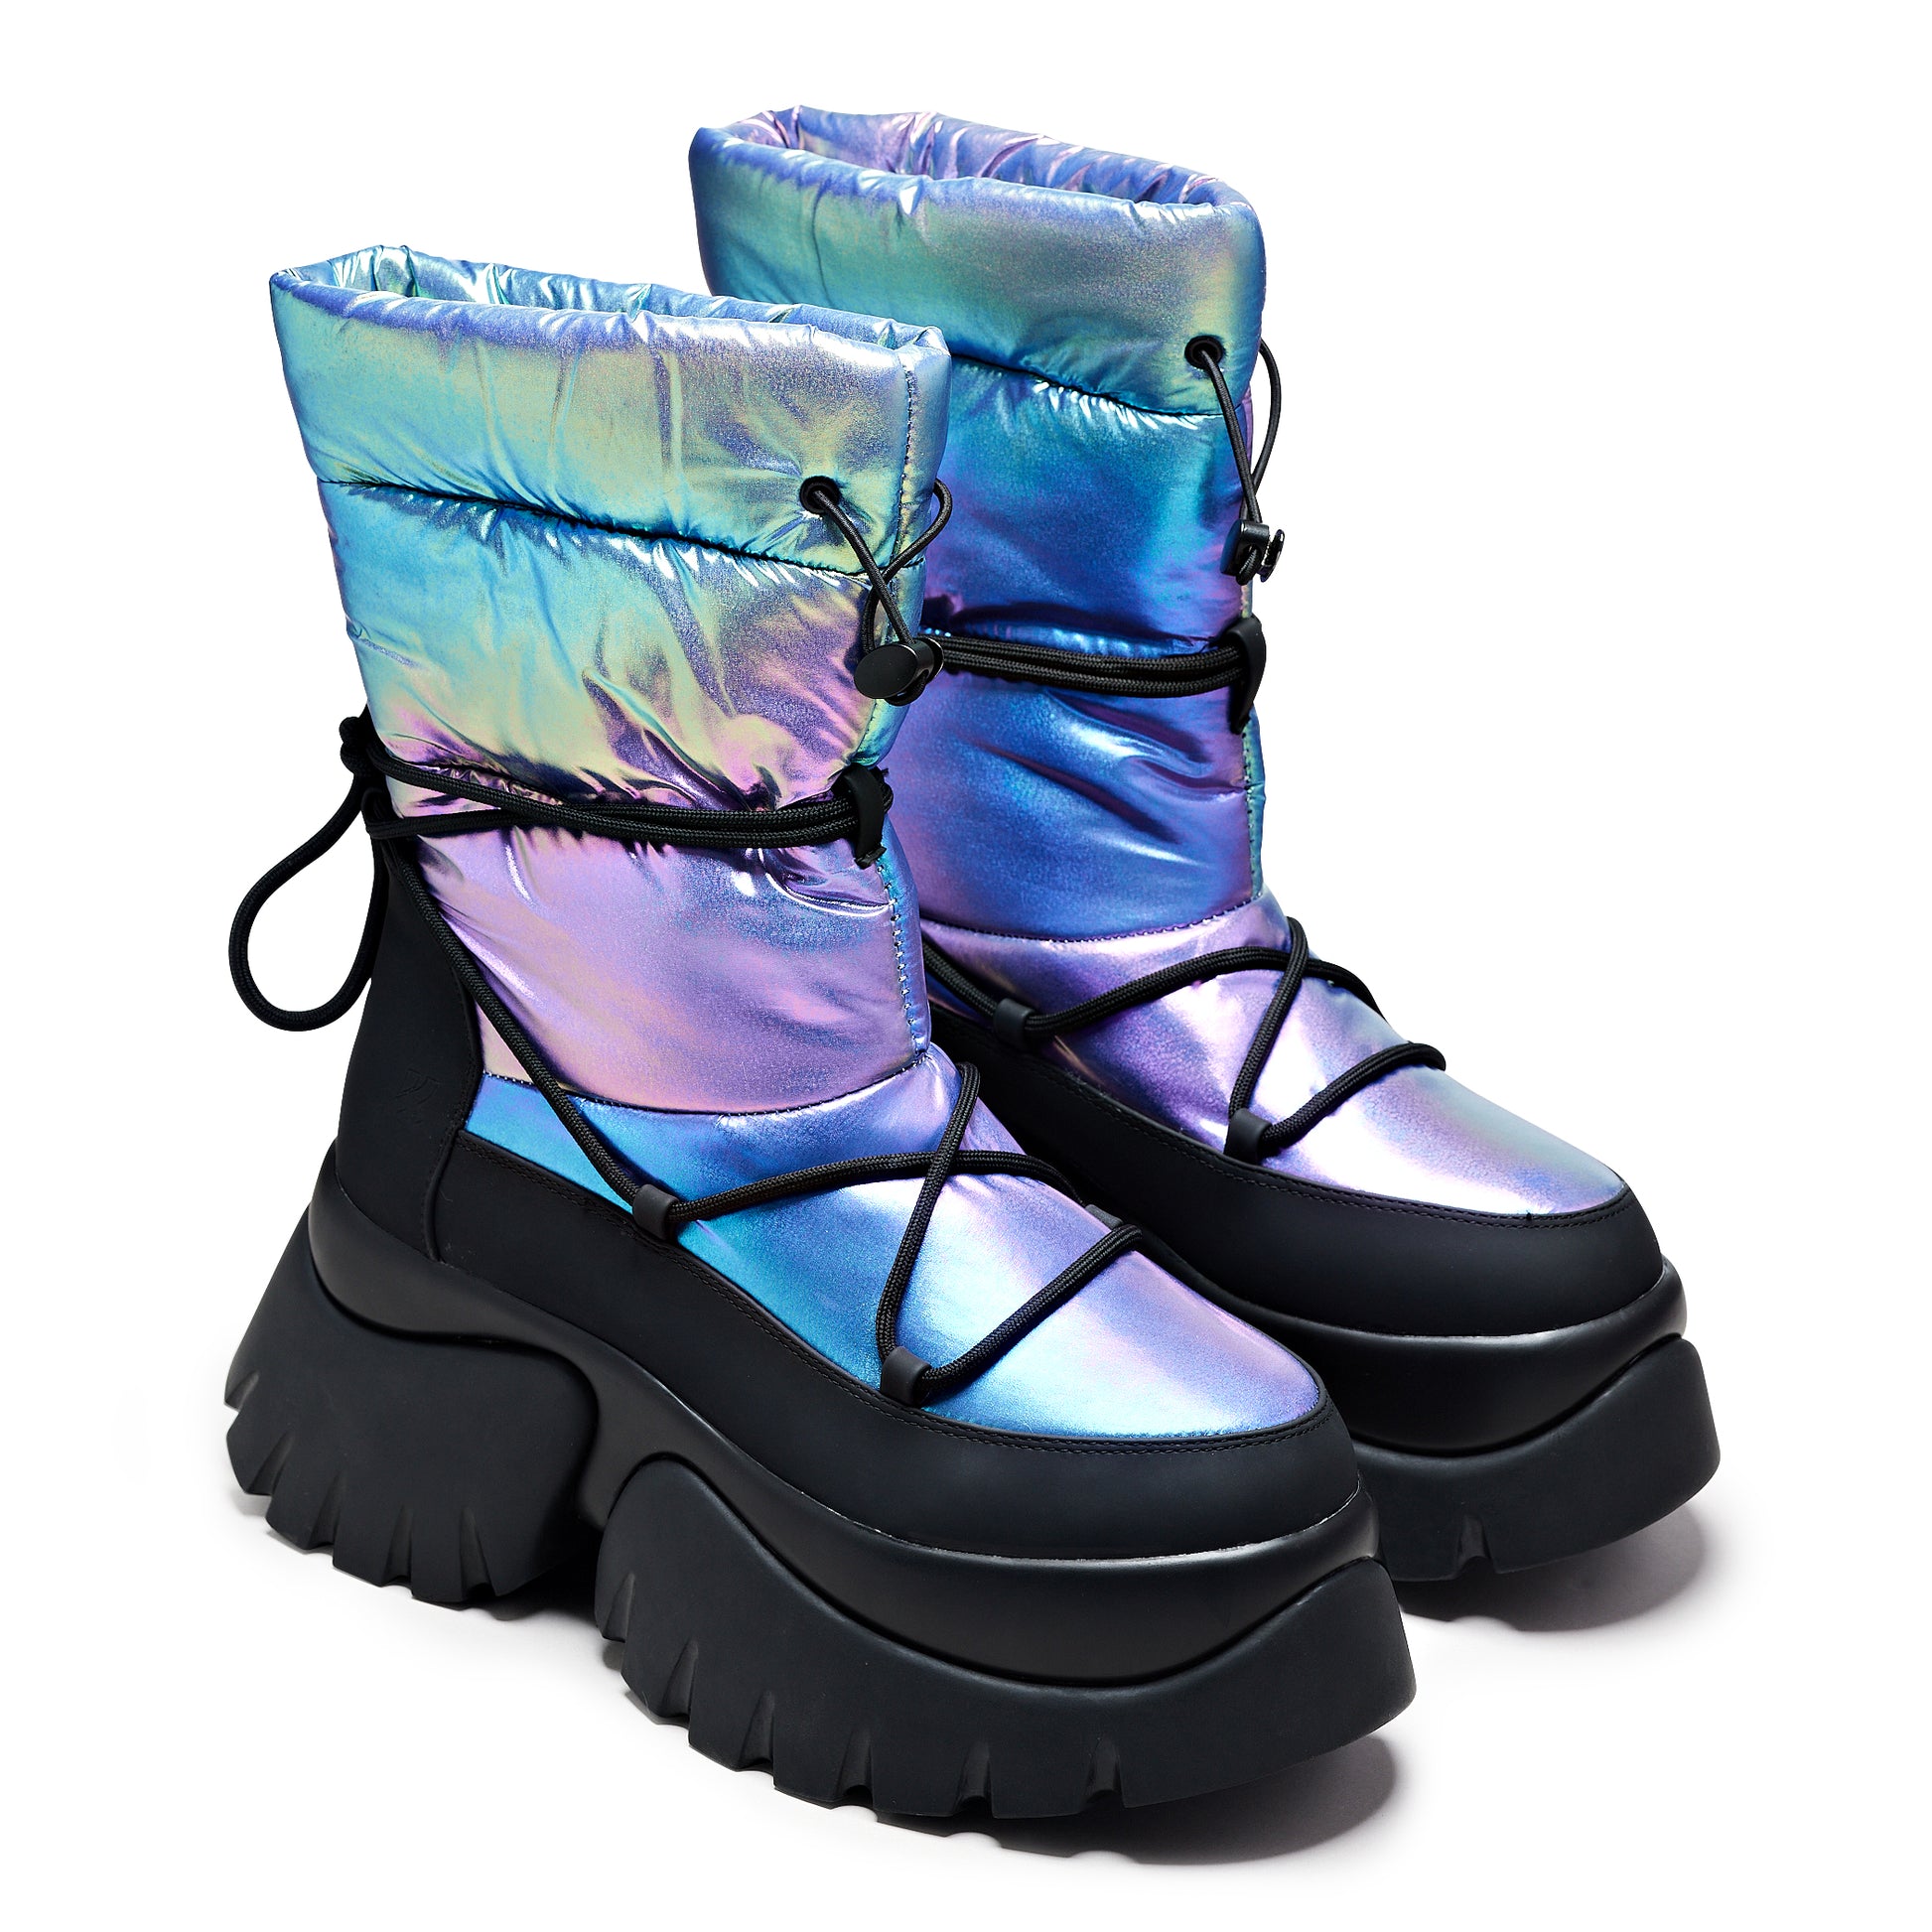 A Glass Mirage Snow Boots - Rainbow - Ankle Boots - KOI Footwear - Multi - Three-Quarter View